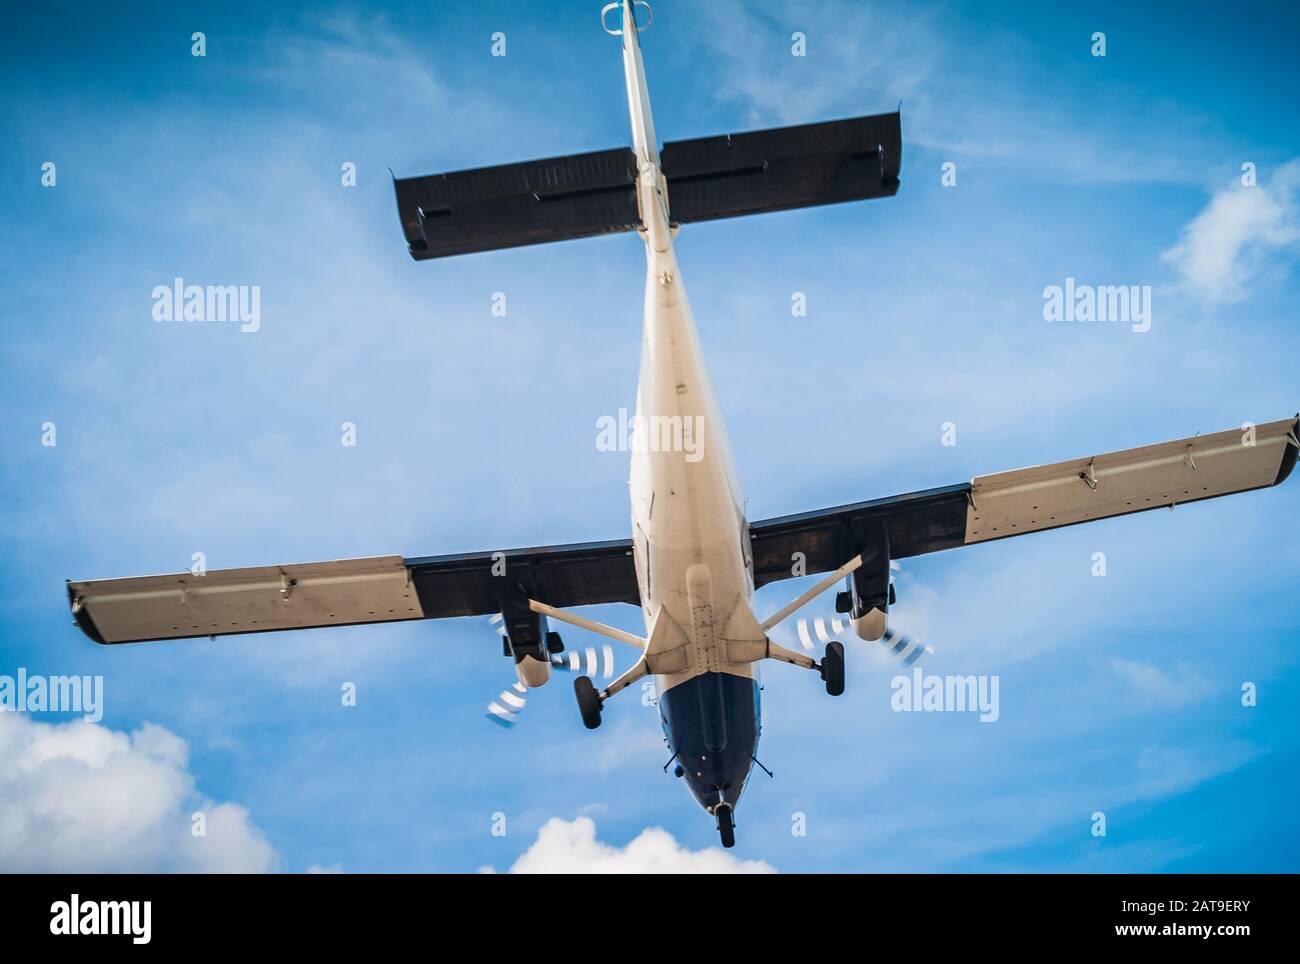 Twin Engine Turbo-Prop Plane Airborne - Flying, Air Travel and Vacation Concept in Blue and White, a Shoulder Wing Propeller Airplane Stock Photo